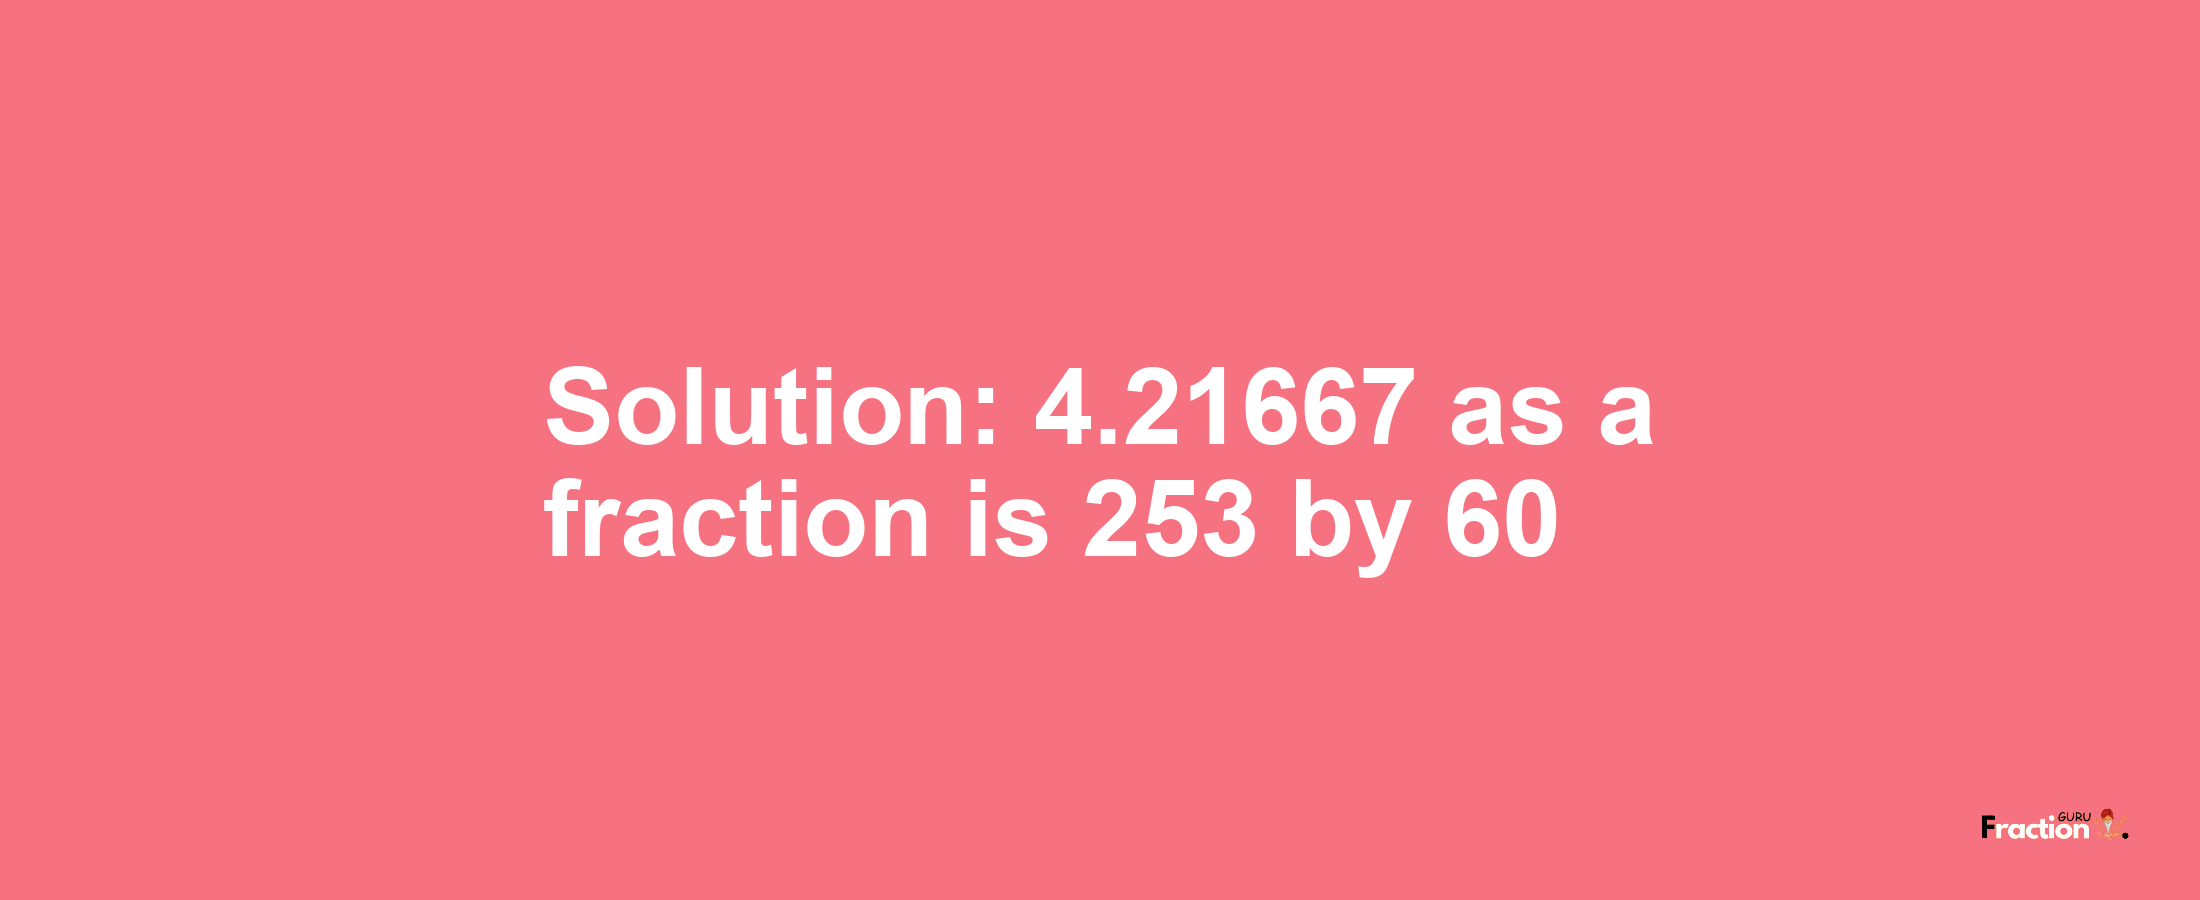 Solution:4.21667 as a fraction is 253/60